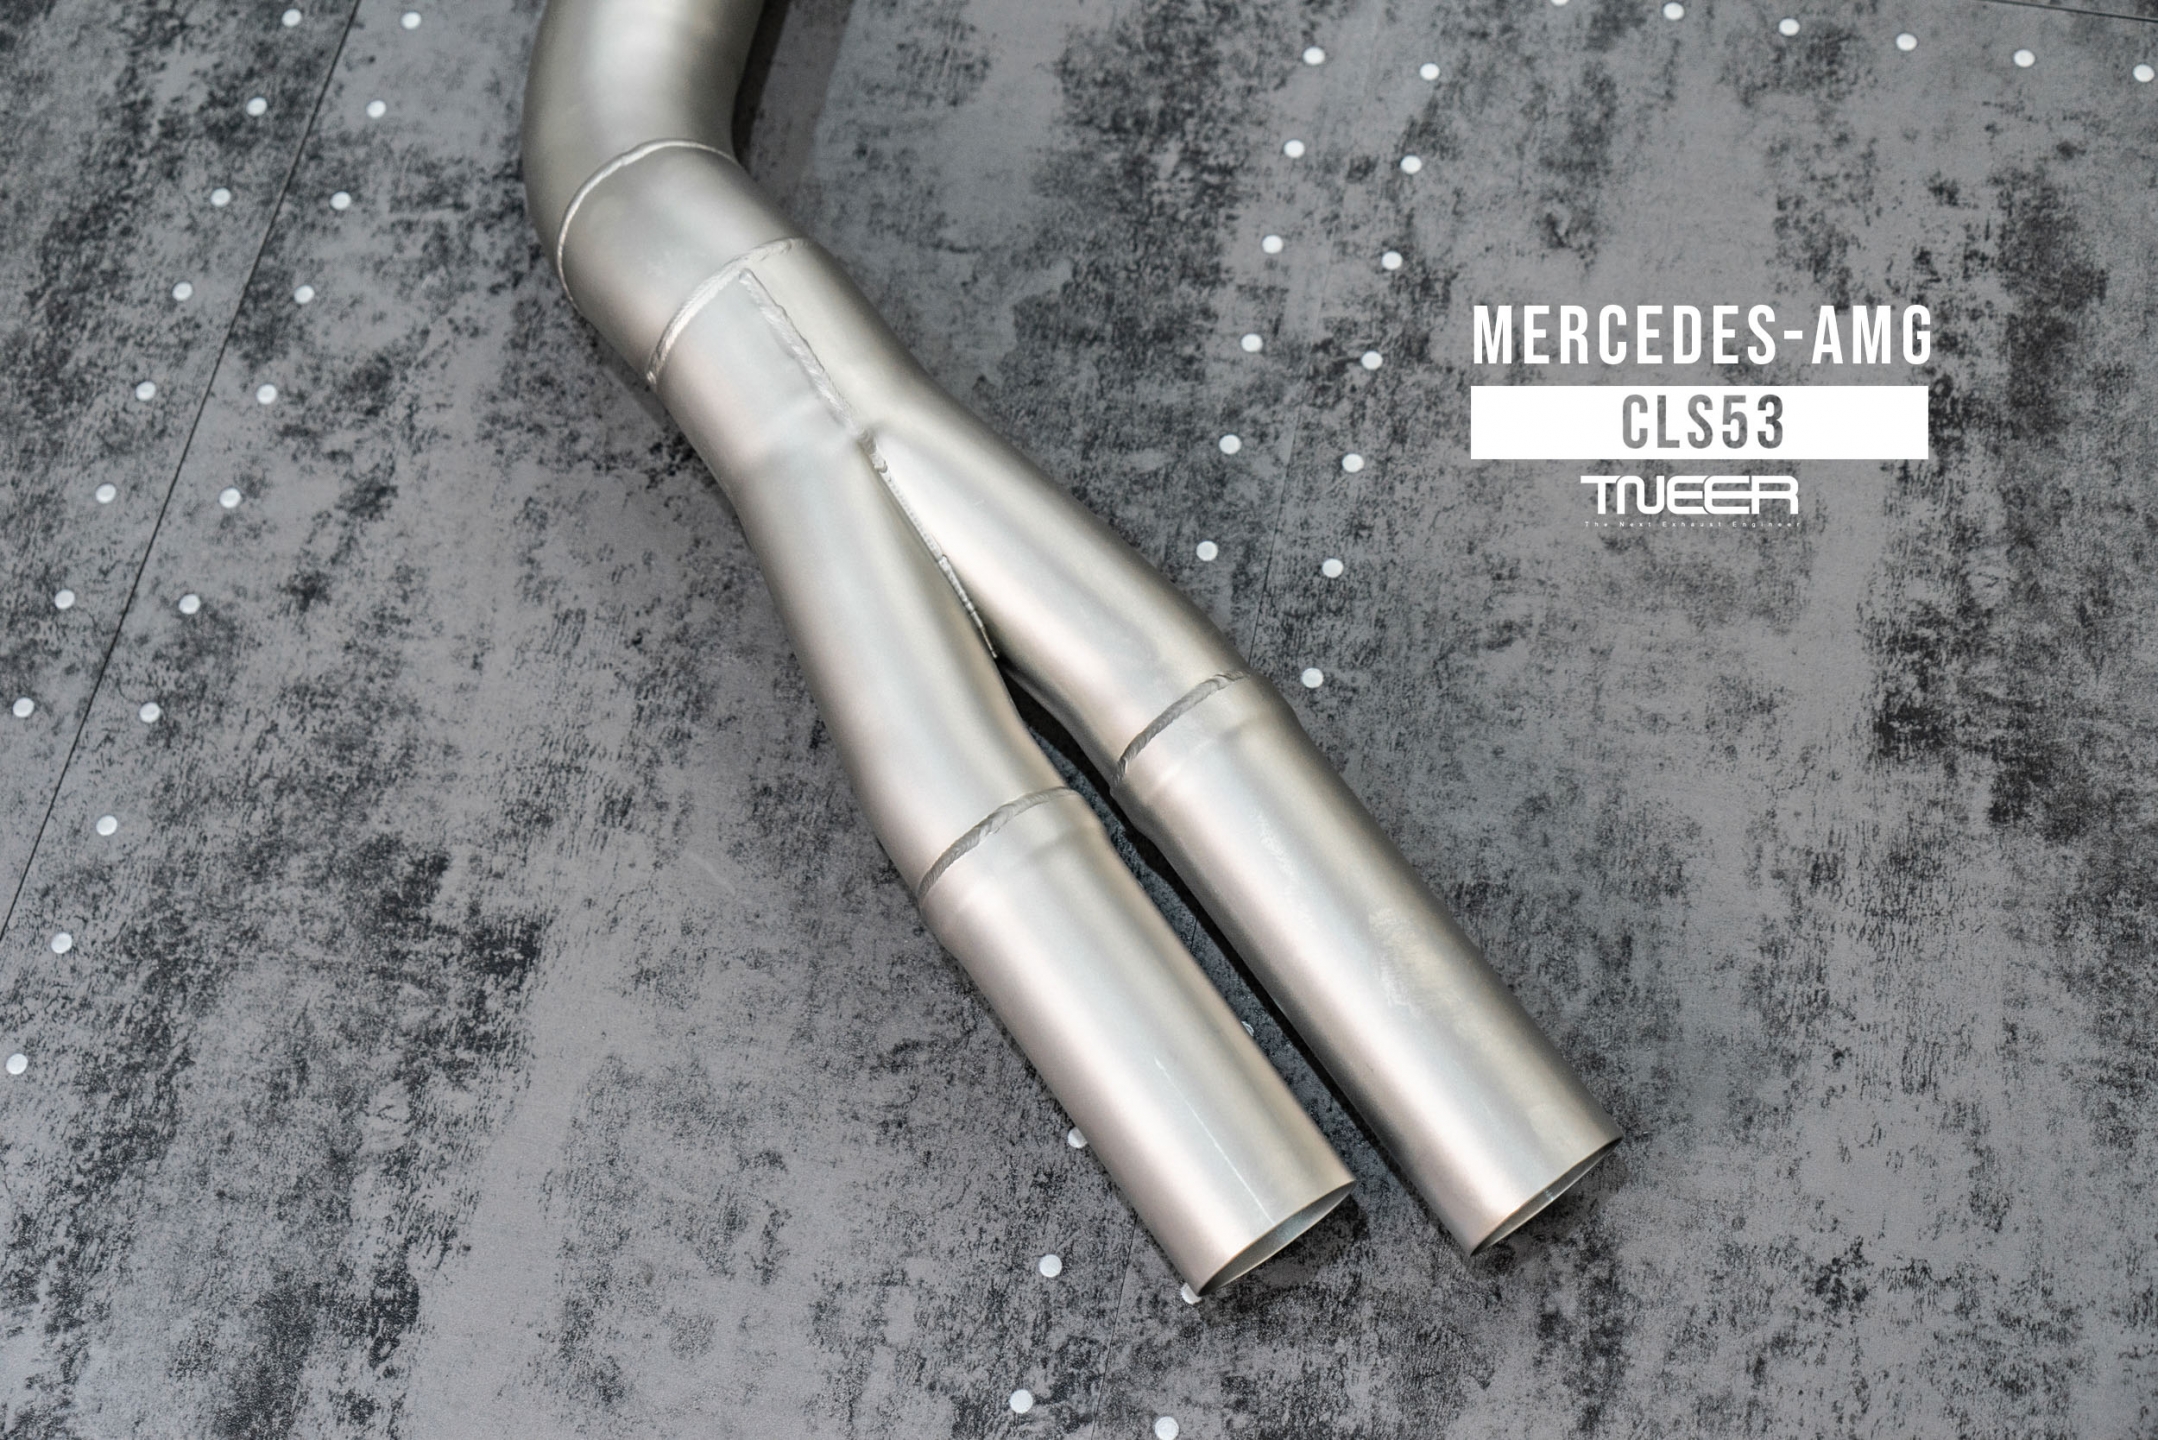 Mercedes-AMG C257 CLS53 LHD TNEER Performance Exhaust System